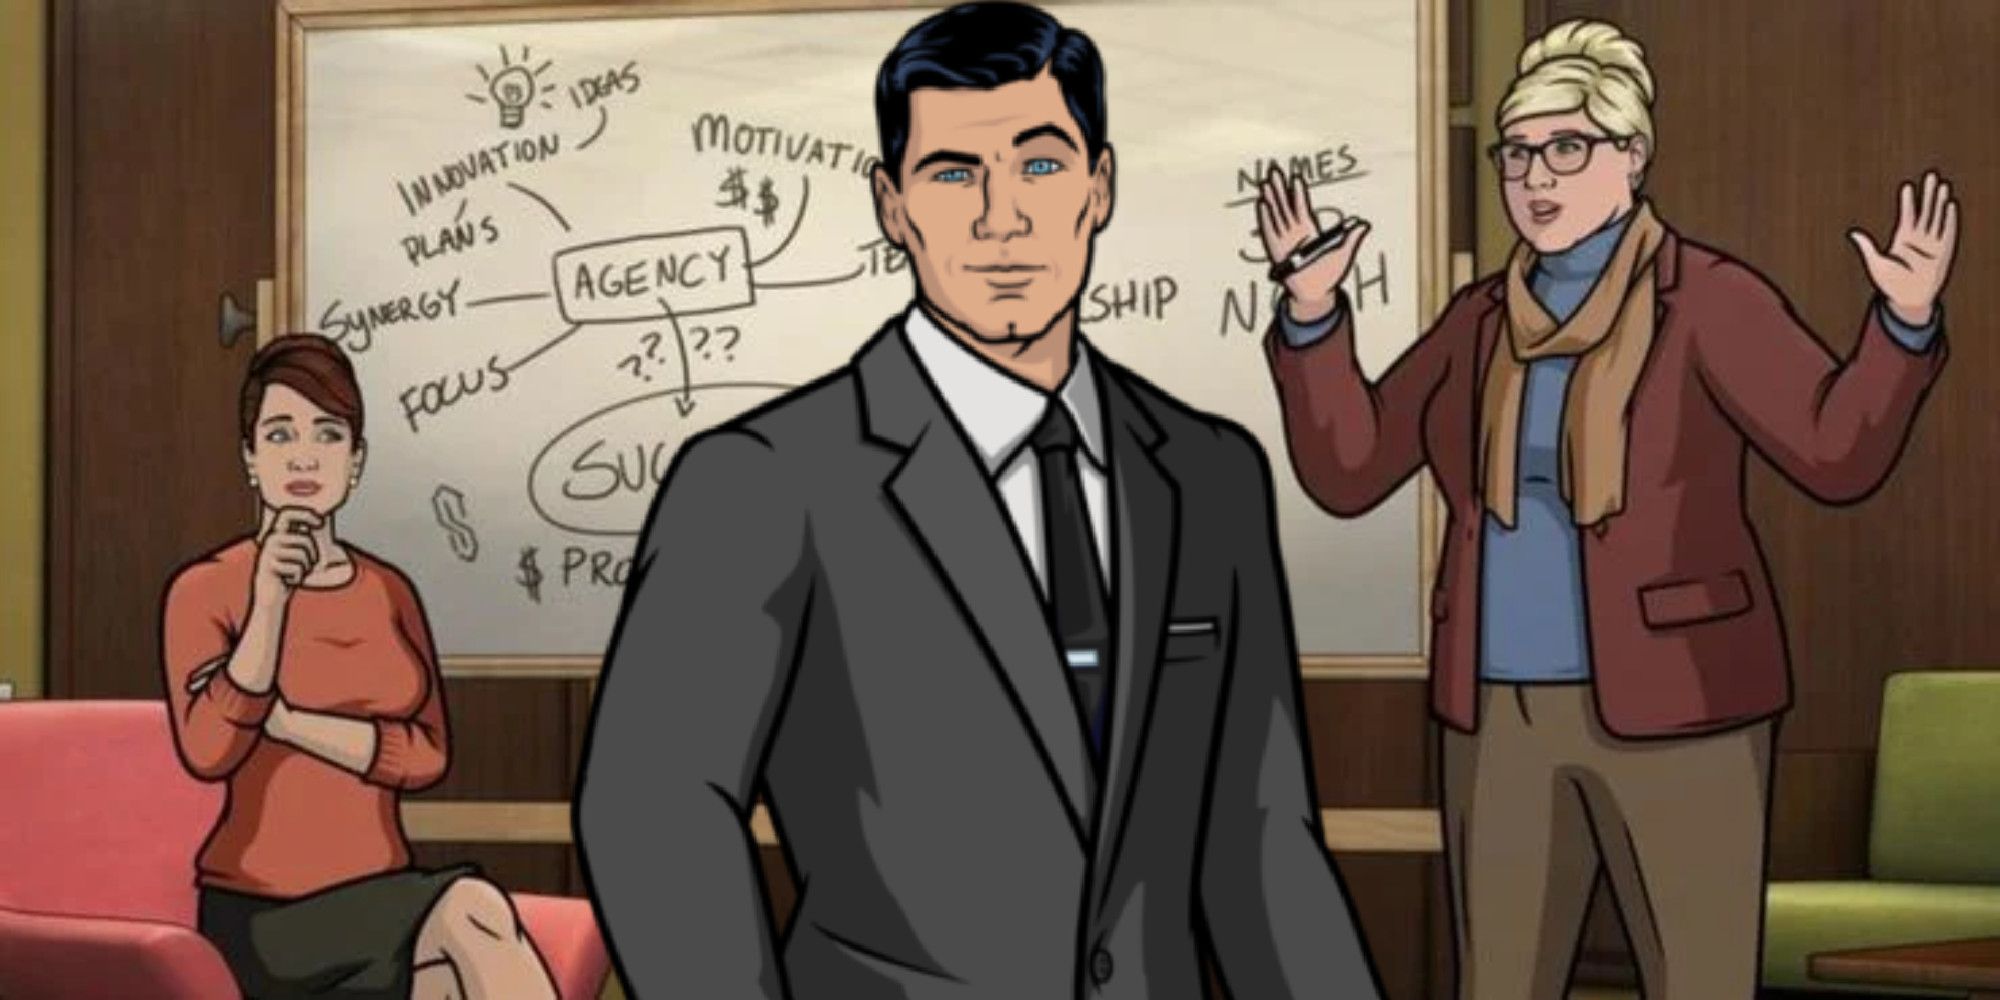 Archer Season 12 Finally Pays Off The Agencys Name Issues